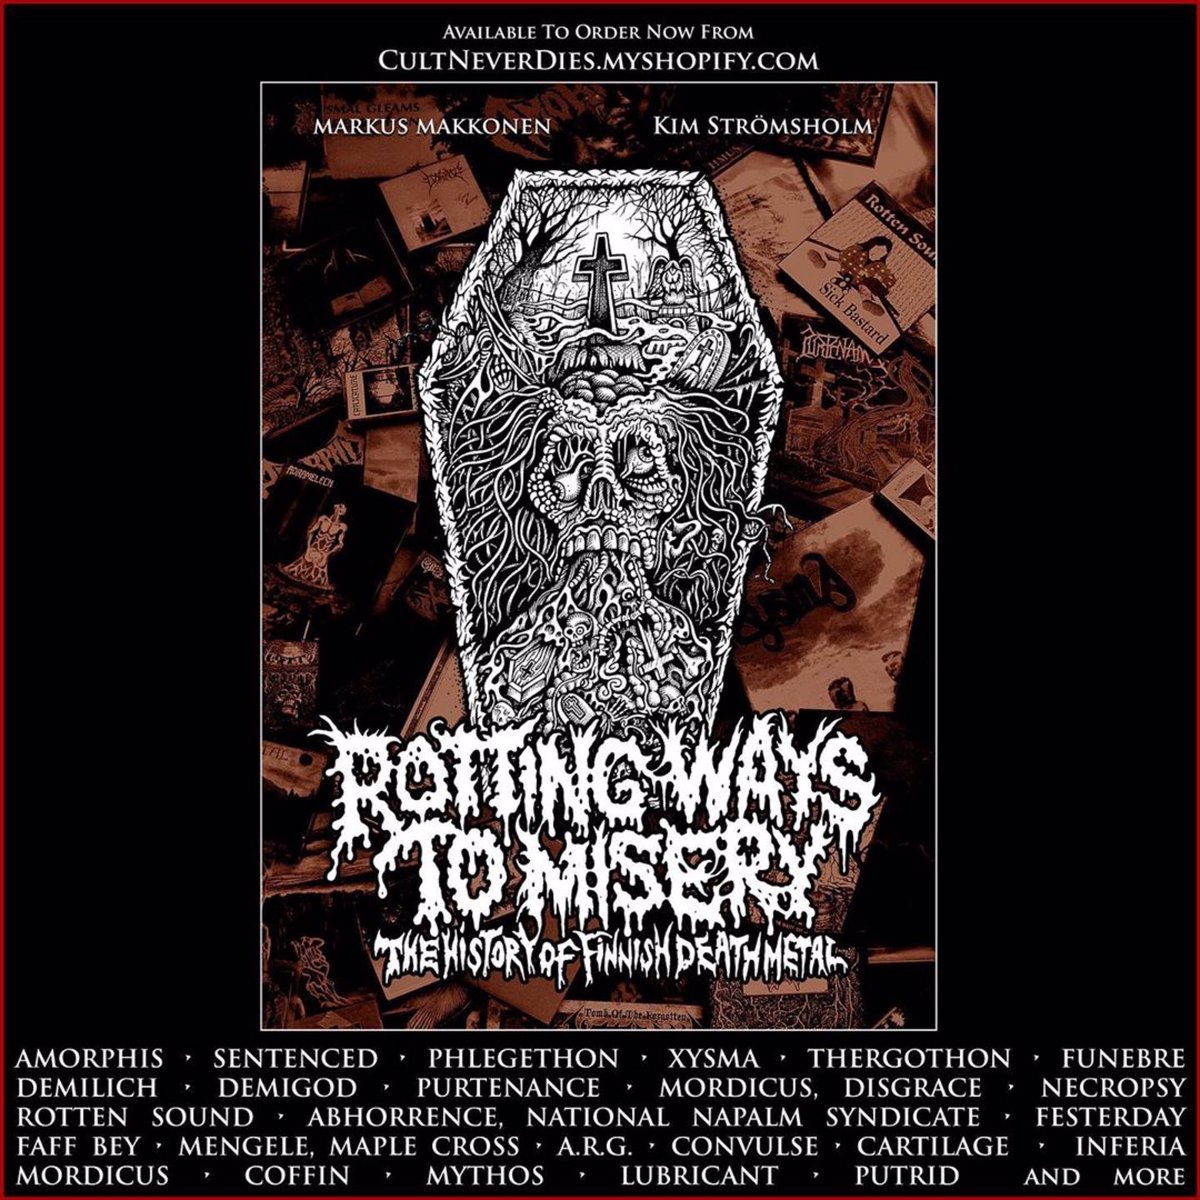 We are part of the Rotting Ways to Misery book - The History of Finnish Death Metal, released November 2020.

Available to order at CultNeverDies.myshopify.com #amorphis #rottingwaystomisery @CultNeverDies